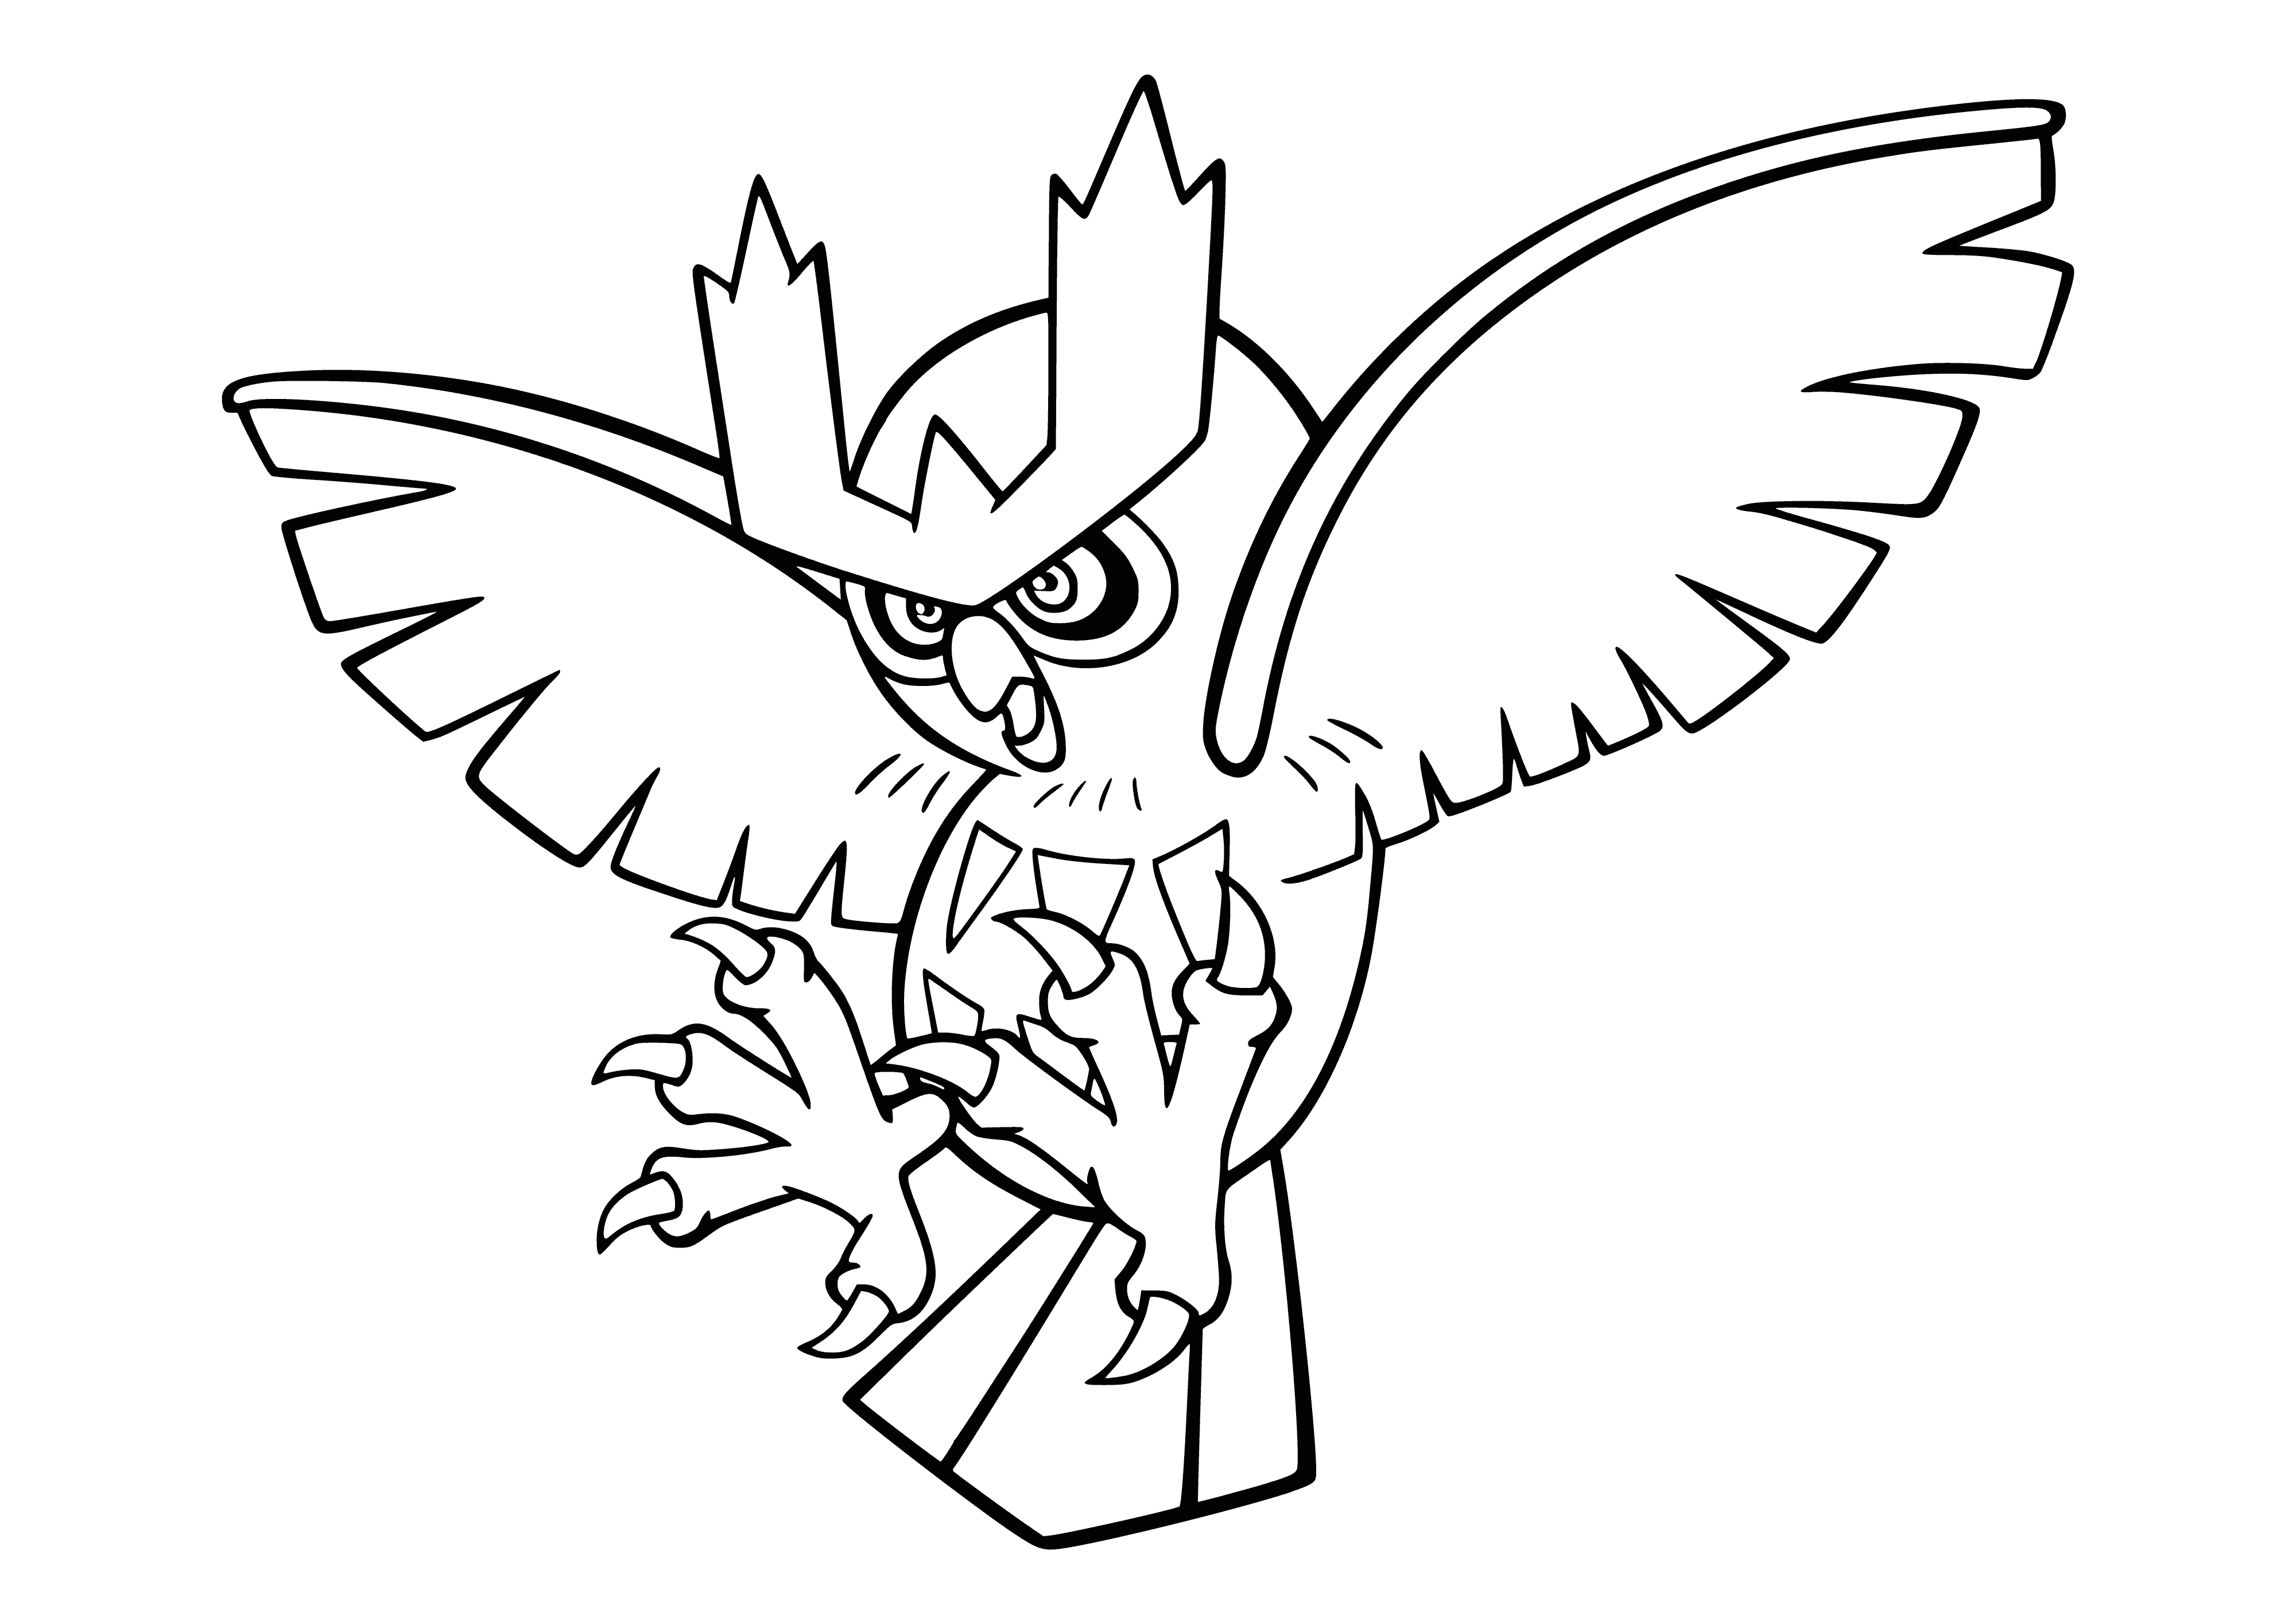 Pokemon Noctowl coloring page